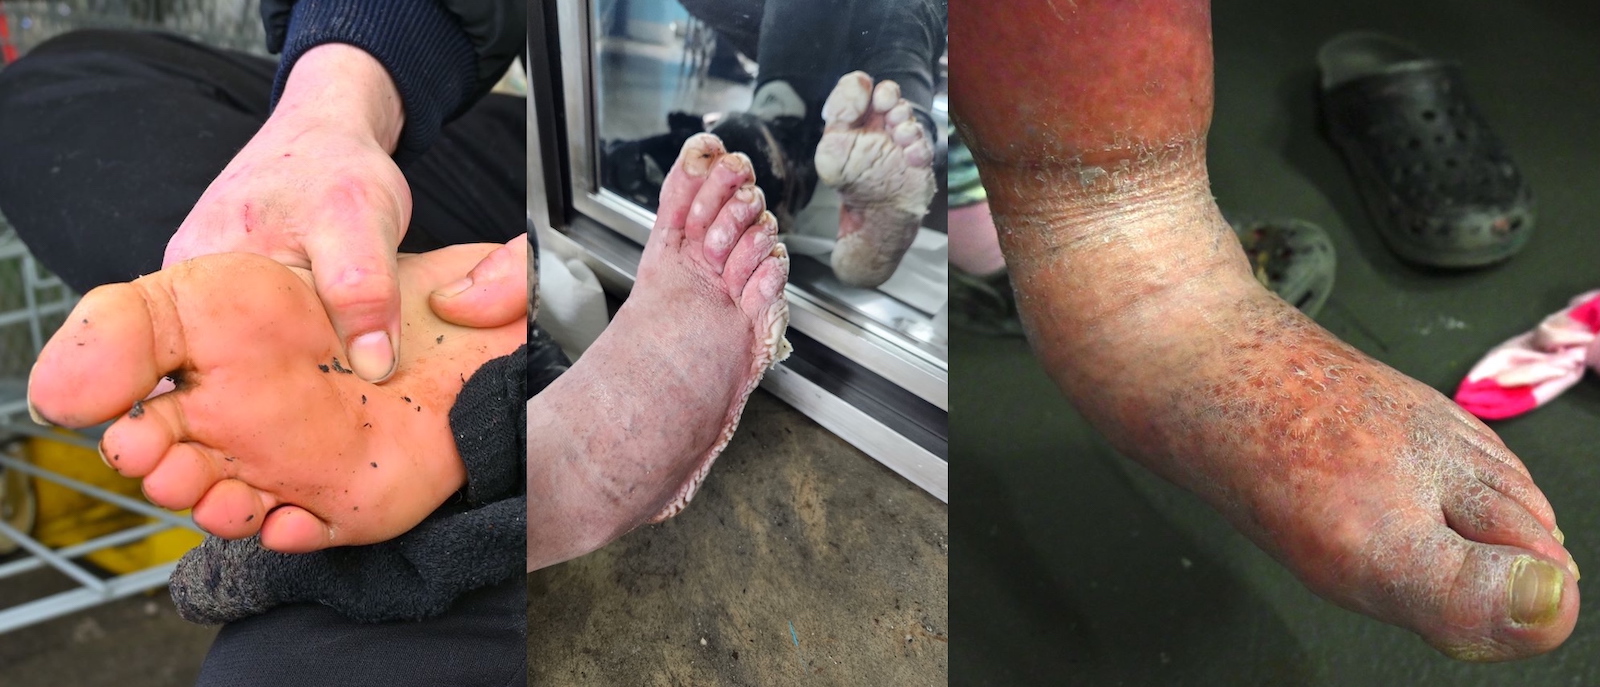 Left: a man rubs the sole of his foot. Middle: a man with water-soaked, white, wrinkled feet. Right: a woman’s foot has cellulitis.